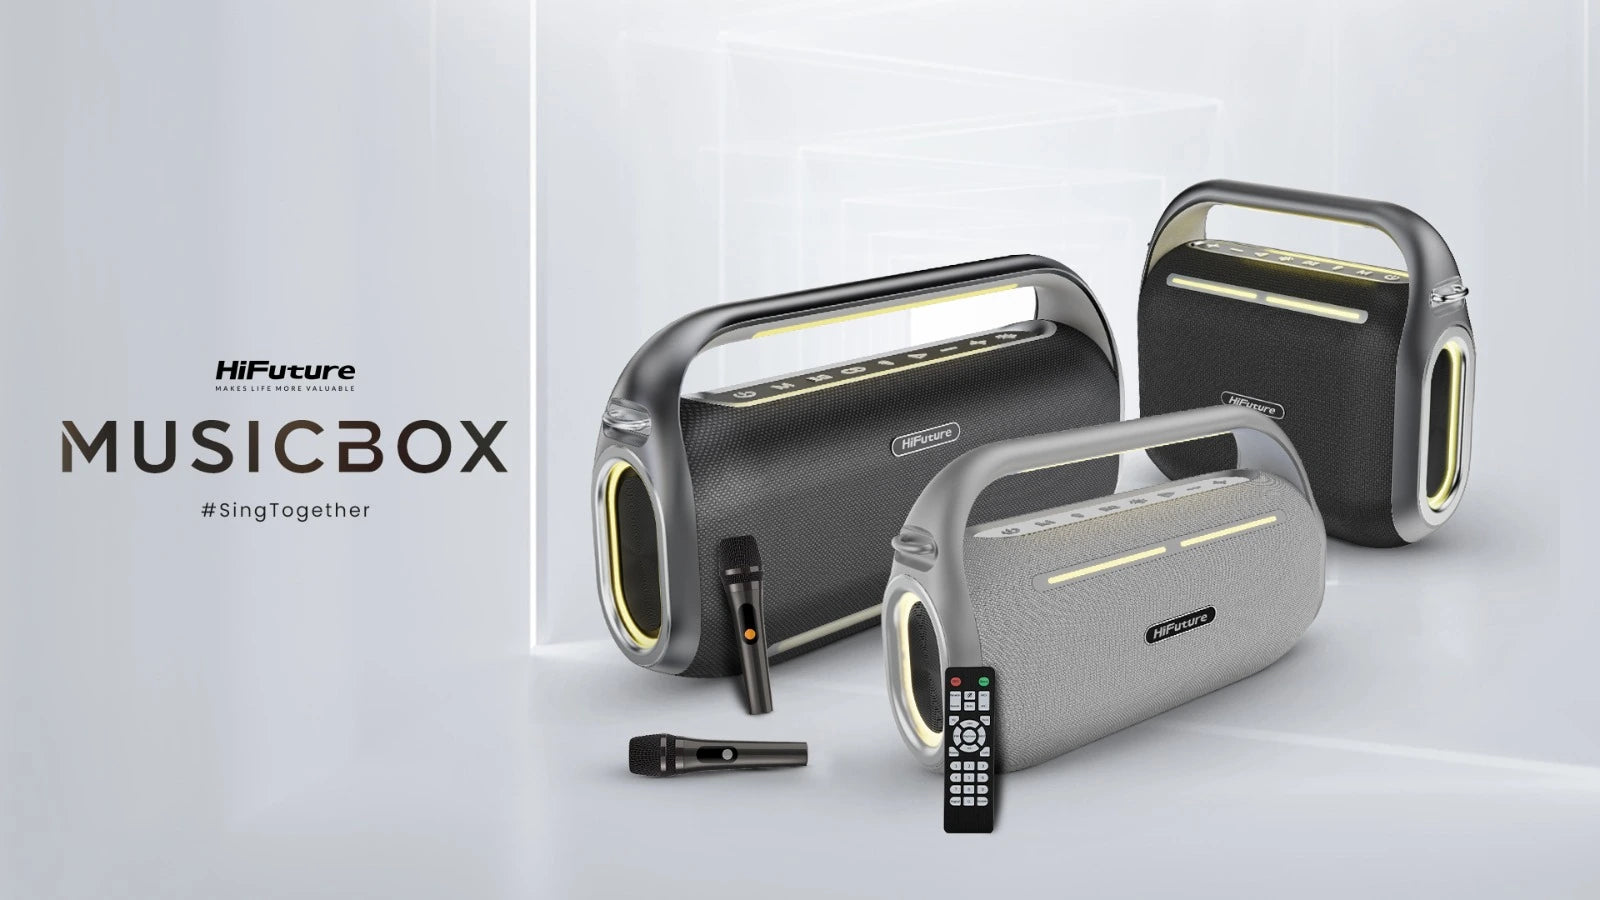 Find Your Spotlight in any Party with HiFuture's MusicBox 300!